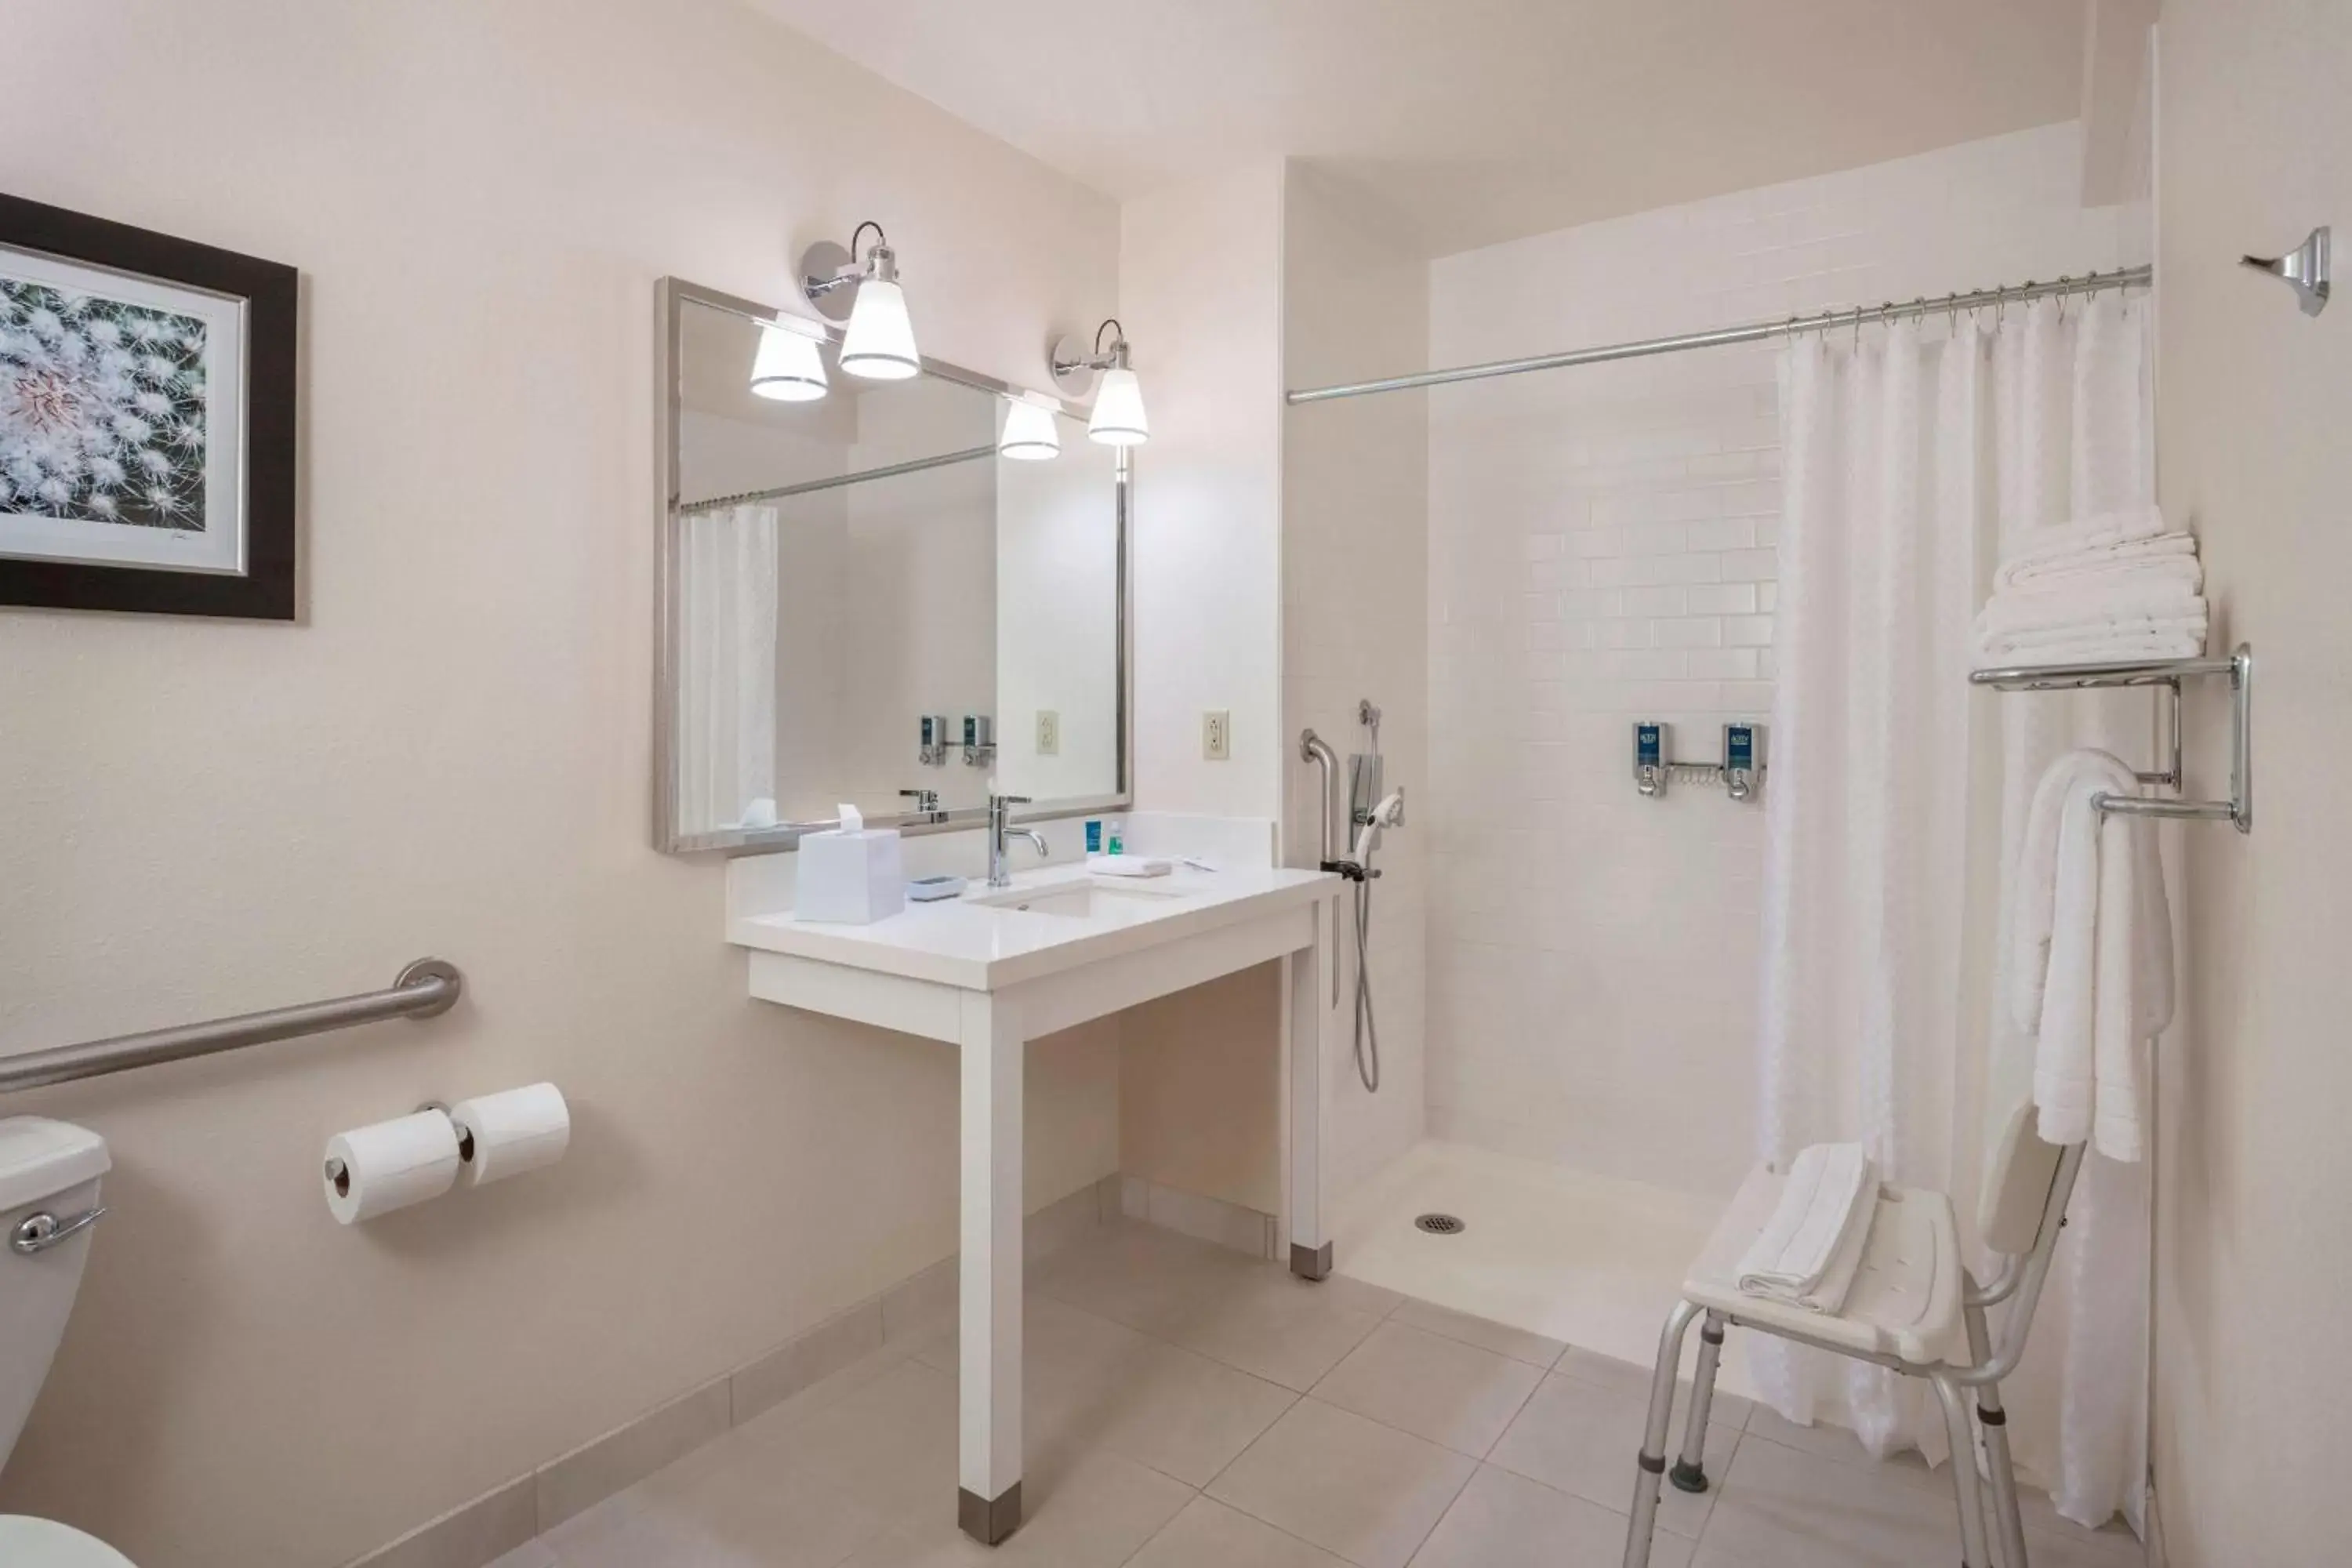 Bathroom in Four Points by Sheraton Tucson Airport